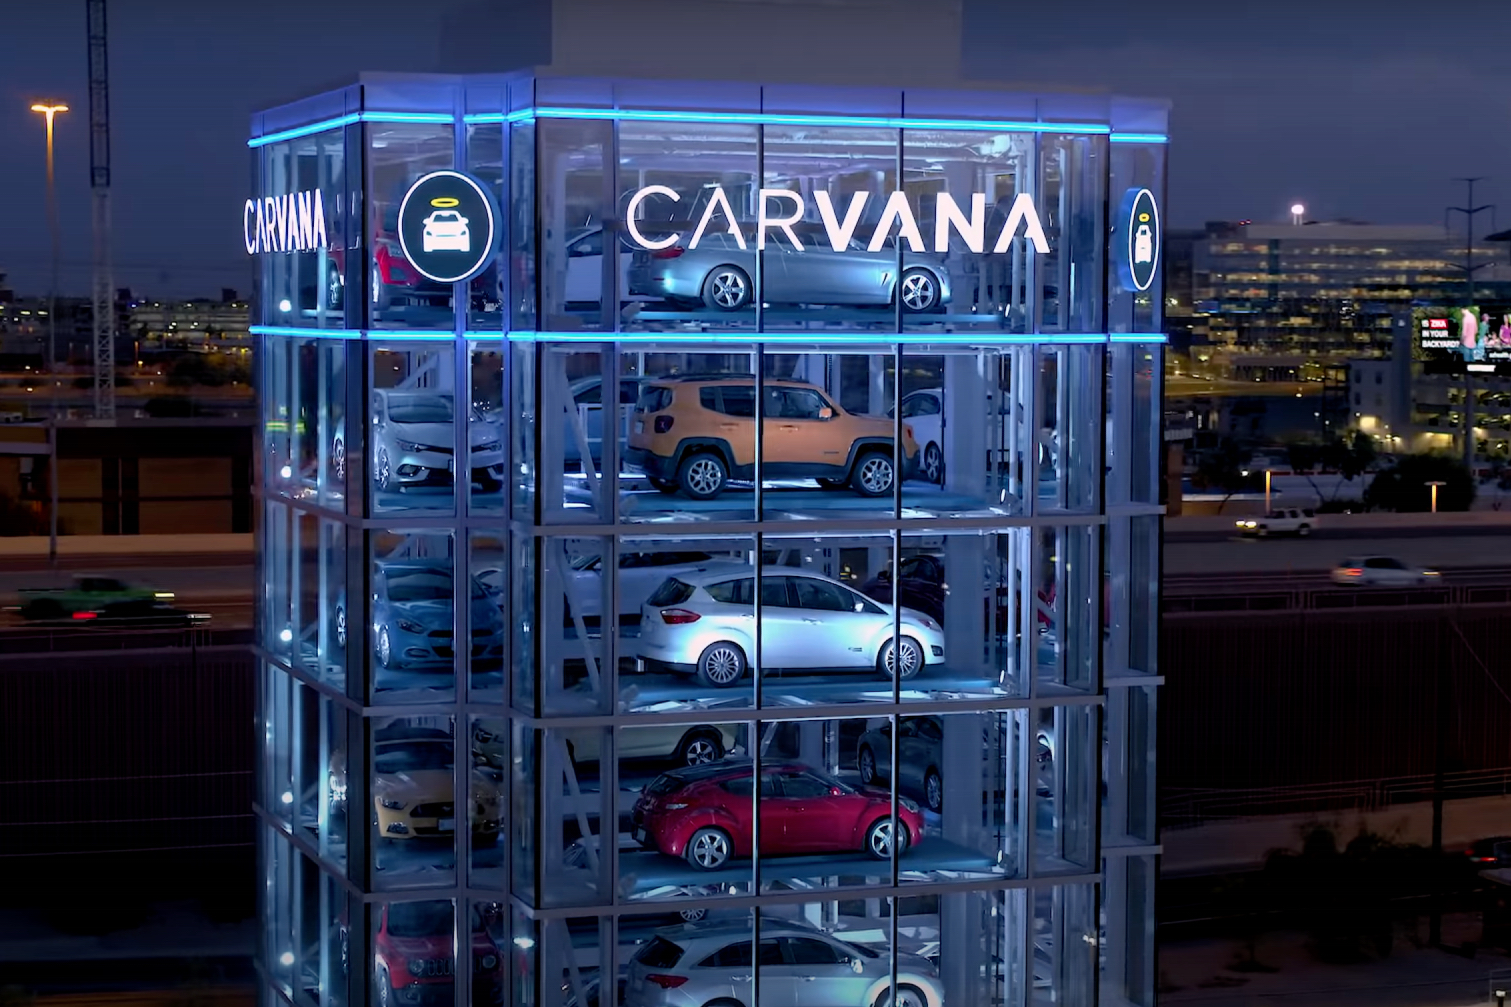 Close up of front end of Carvana Vending Machine at night time in front of buildings.